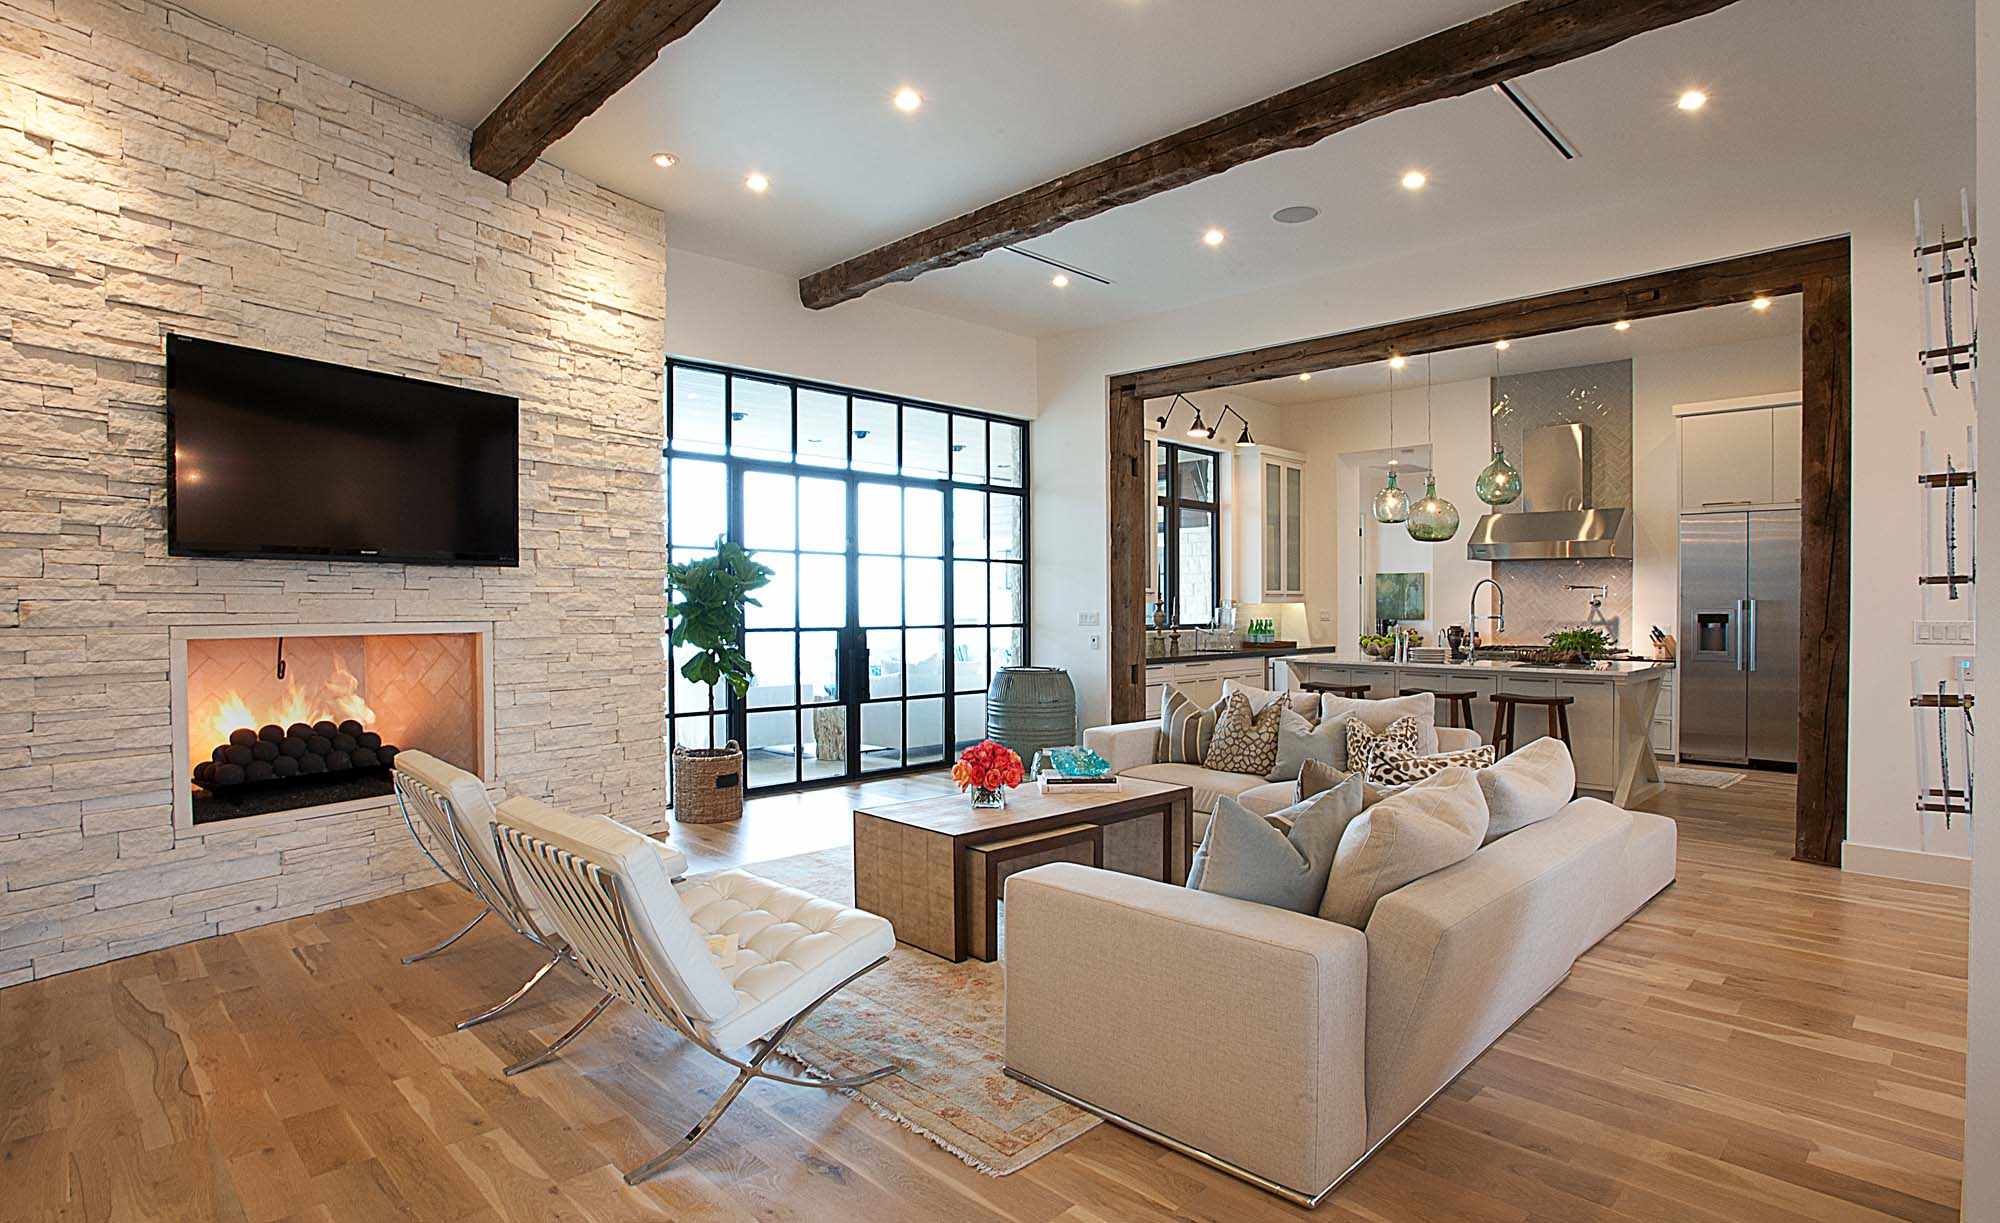 An example of applying a bright decor of a living room with a fireplace